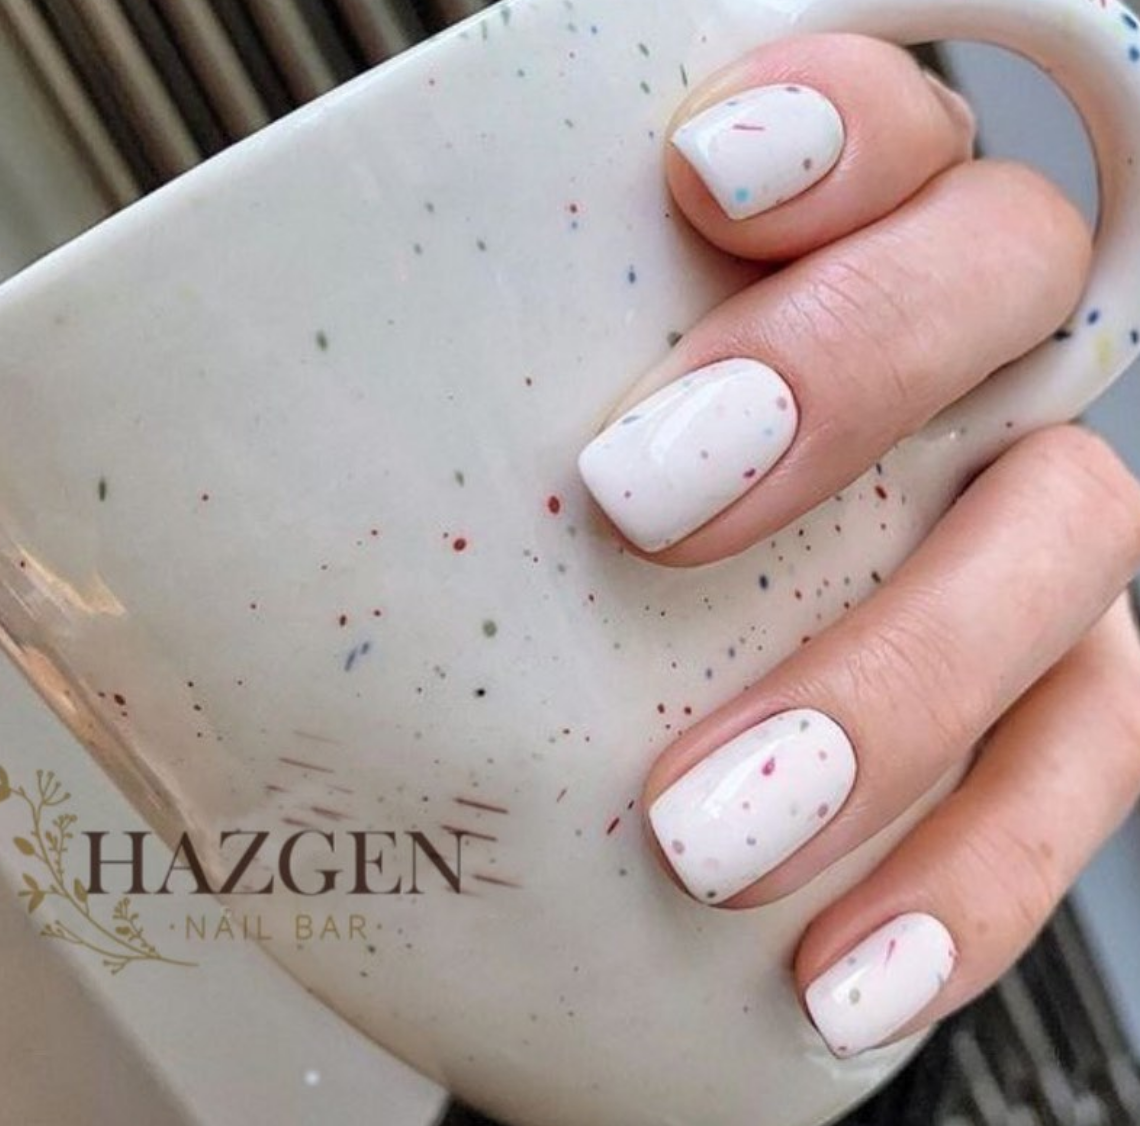 5 Best Nail Salons in Ho Chi Minh City